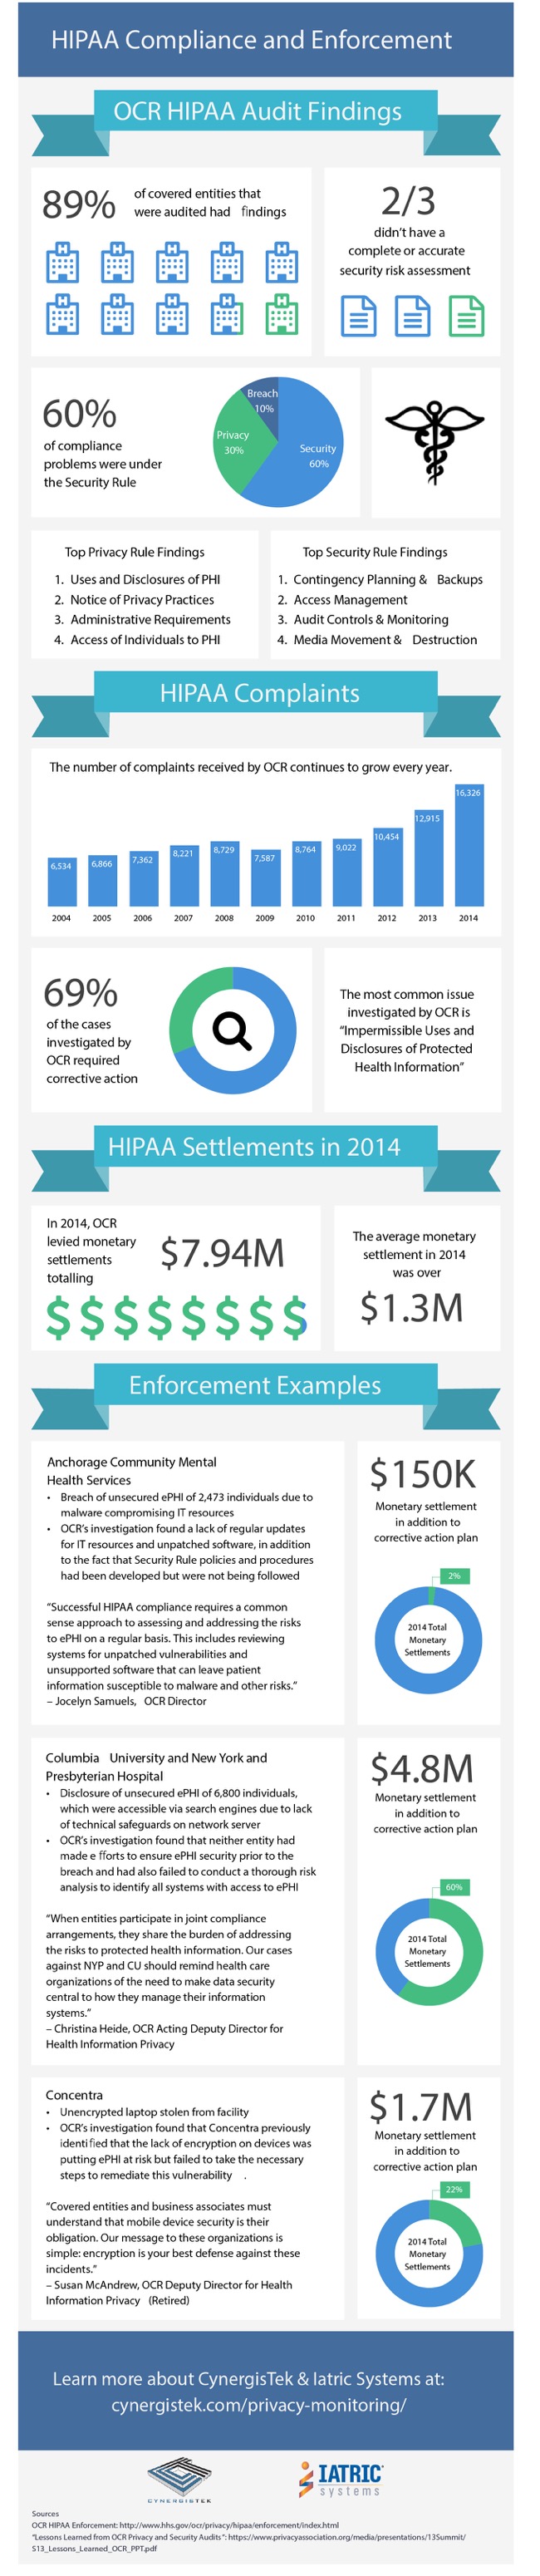 HIPAA Compliance & Enforcement and OCR HIPAA Audit Findings Infographic